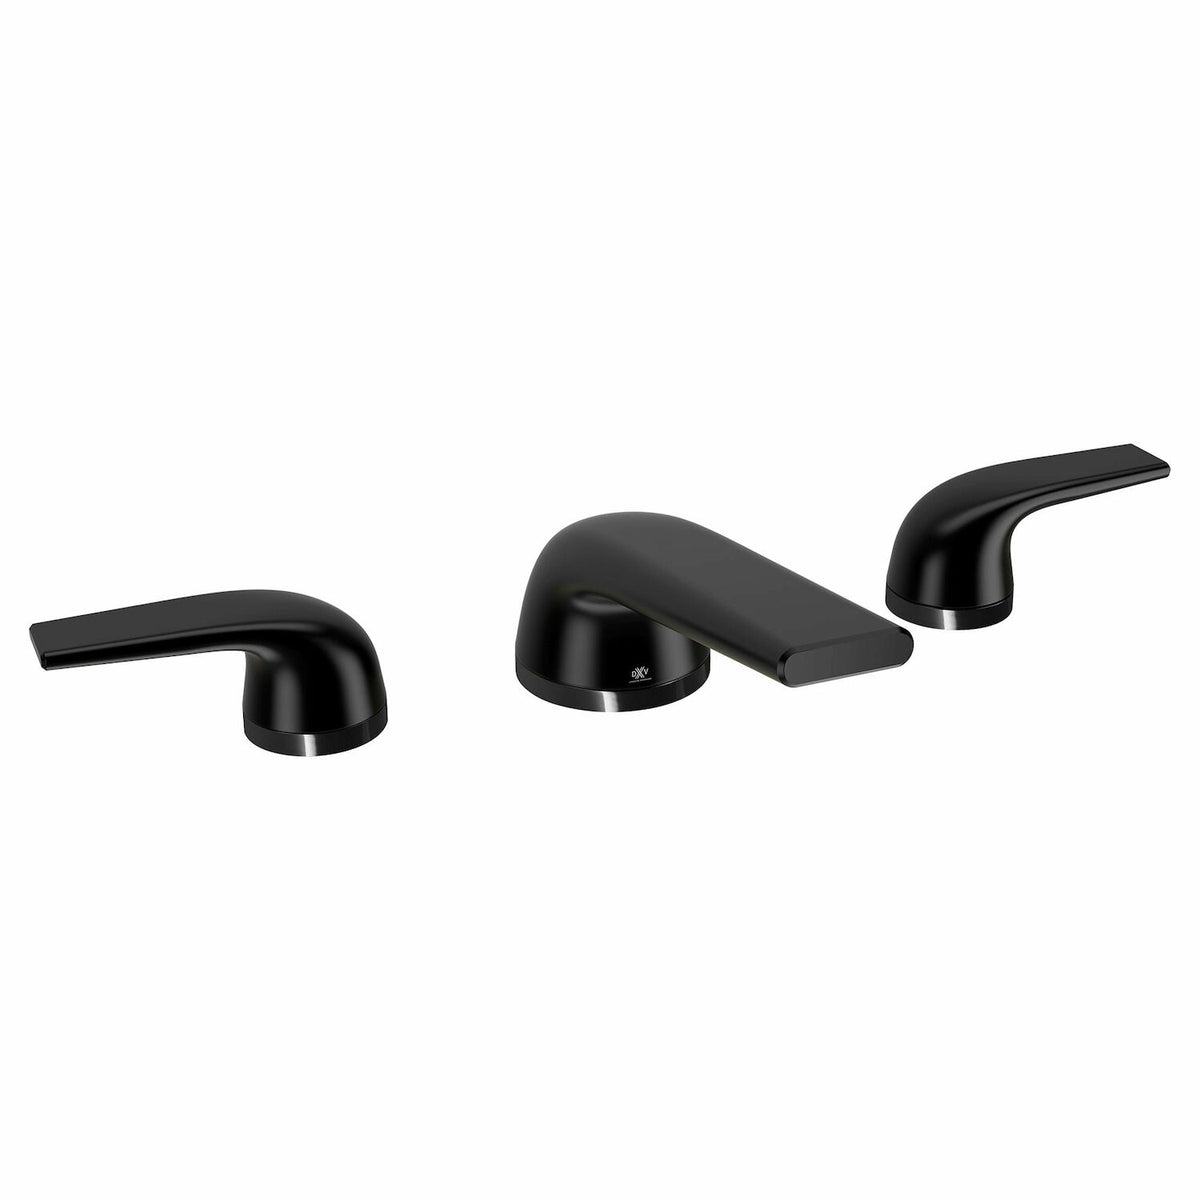 MODULUS 2-HANDLE WIDESPREAD BATHROOM FAUCET WITH LEVER HANDLES